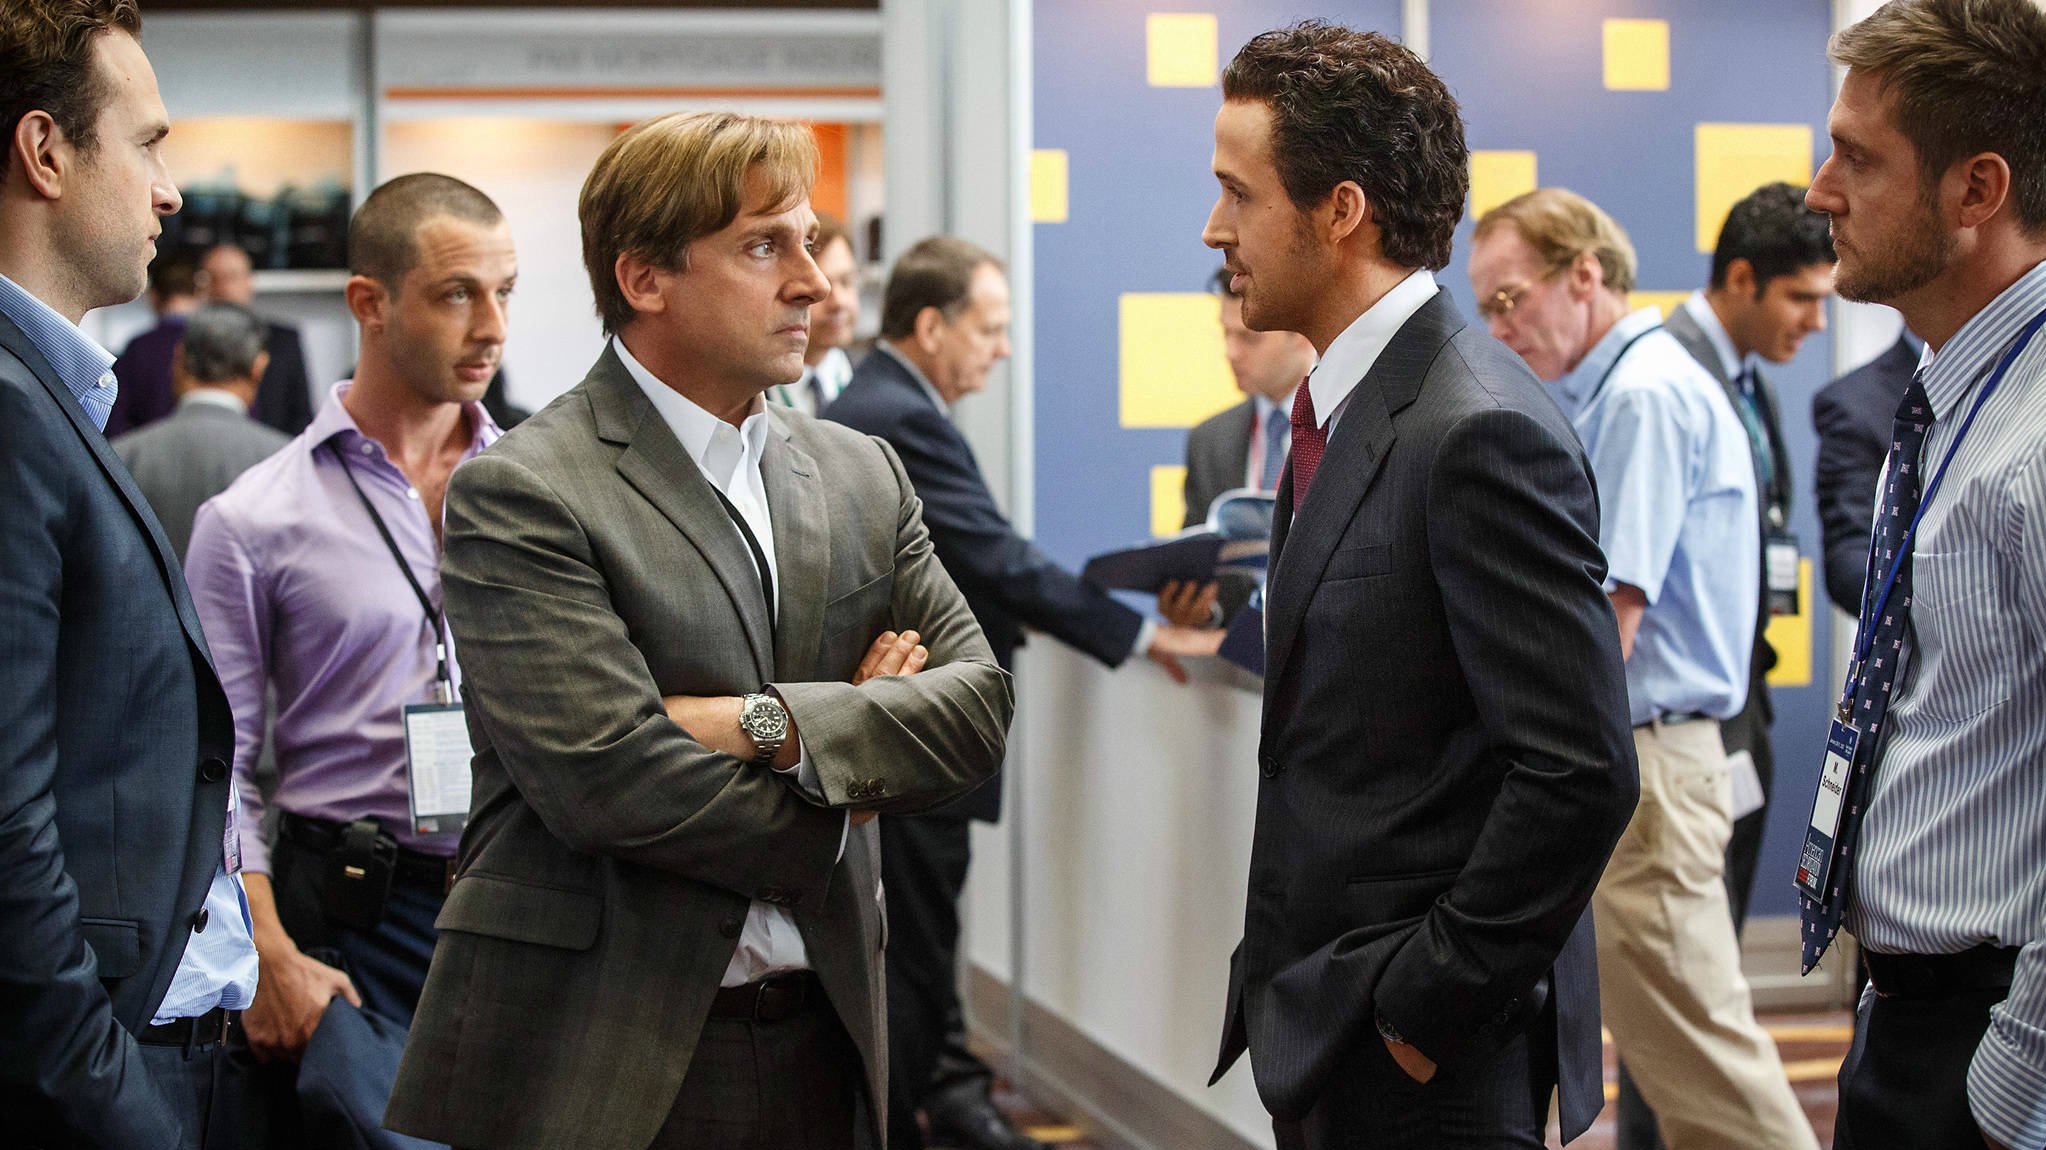 Movie The Big Short HD Wallpaper | Background Image